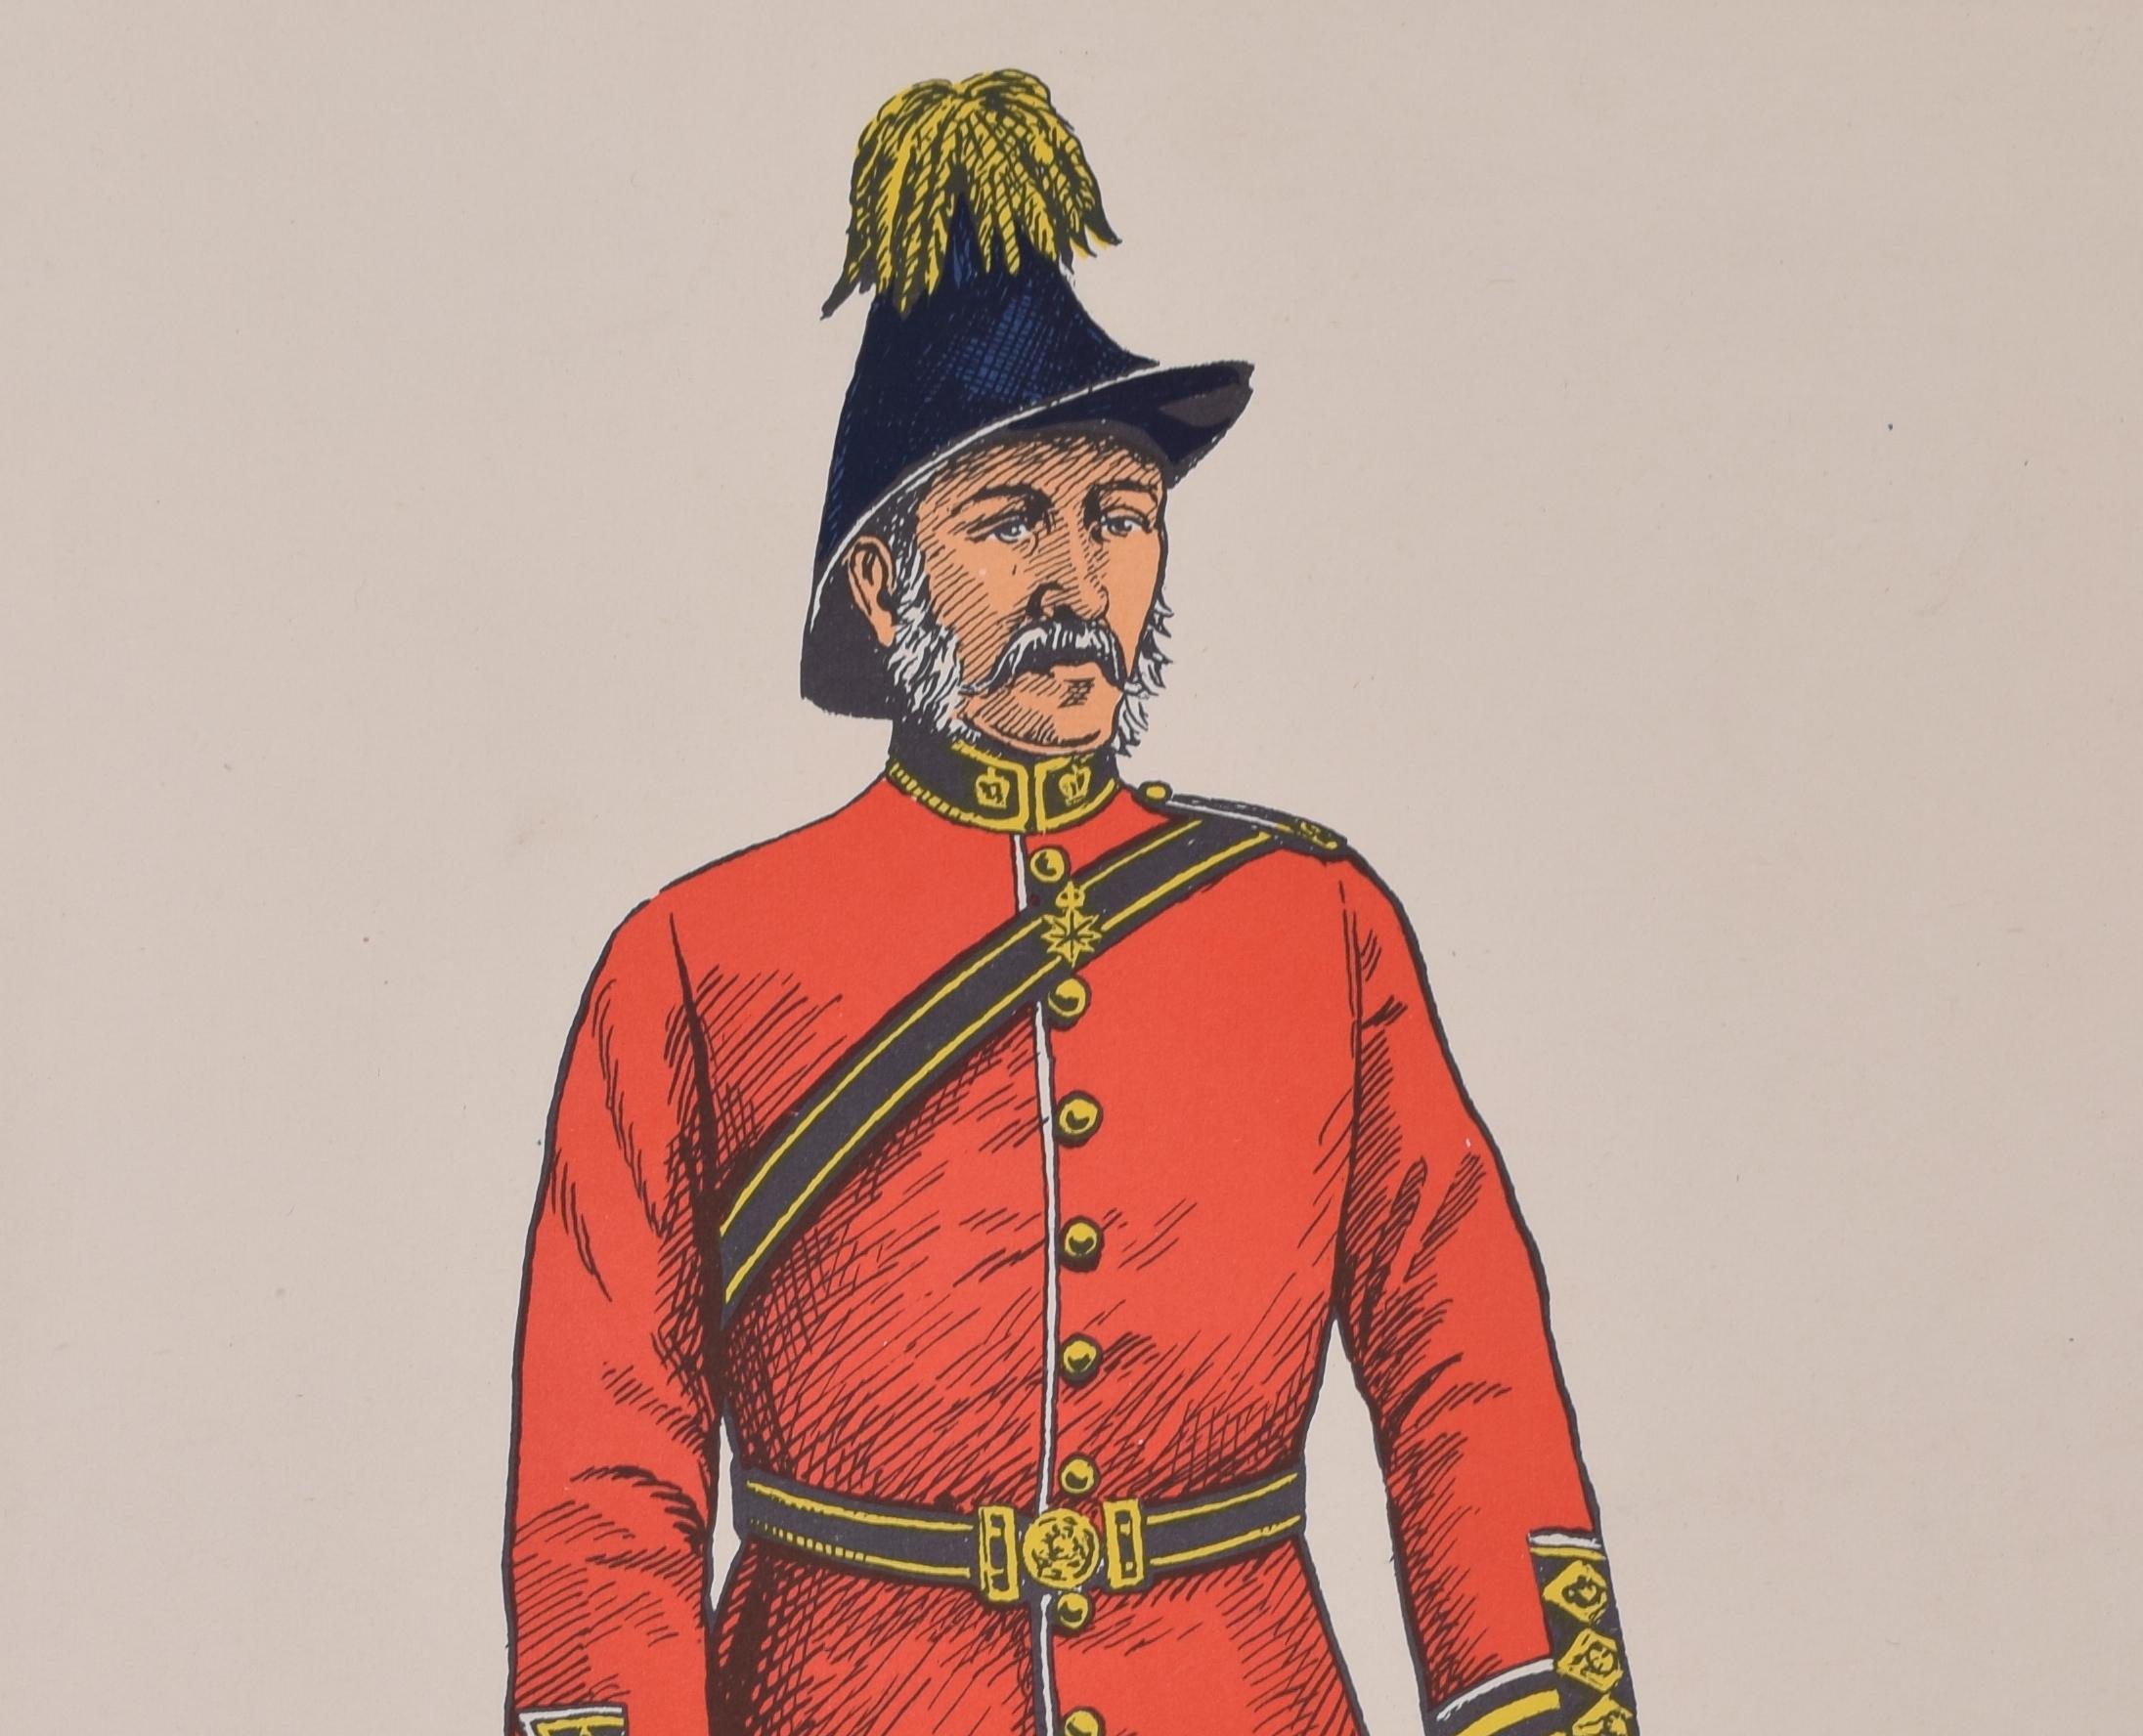 9th Queen's Royal Lancers Officer Institute of Army Education uniform lithograph - Print by Unknown